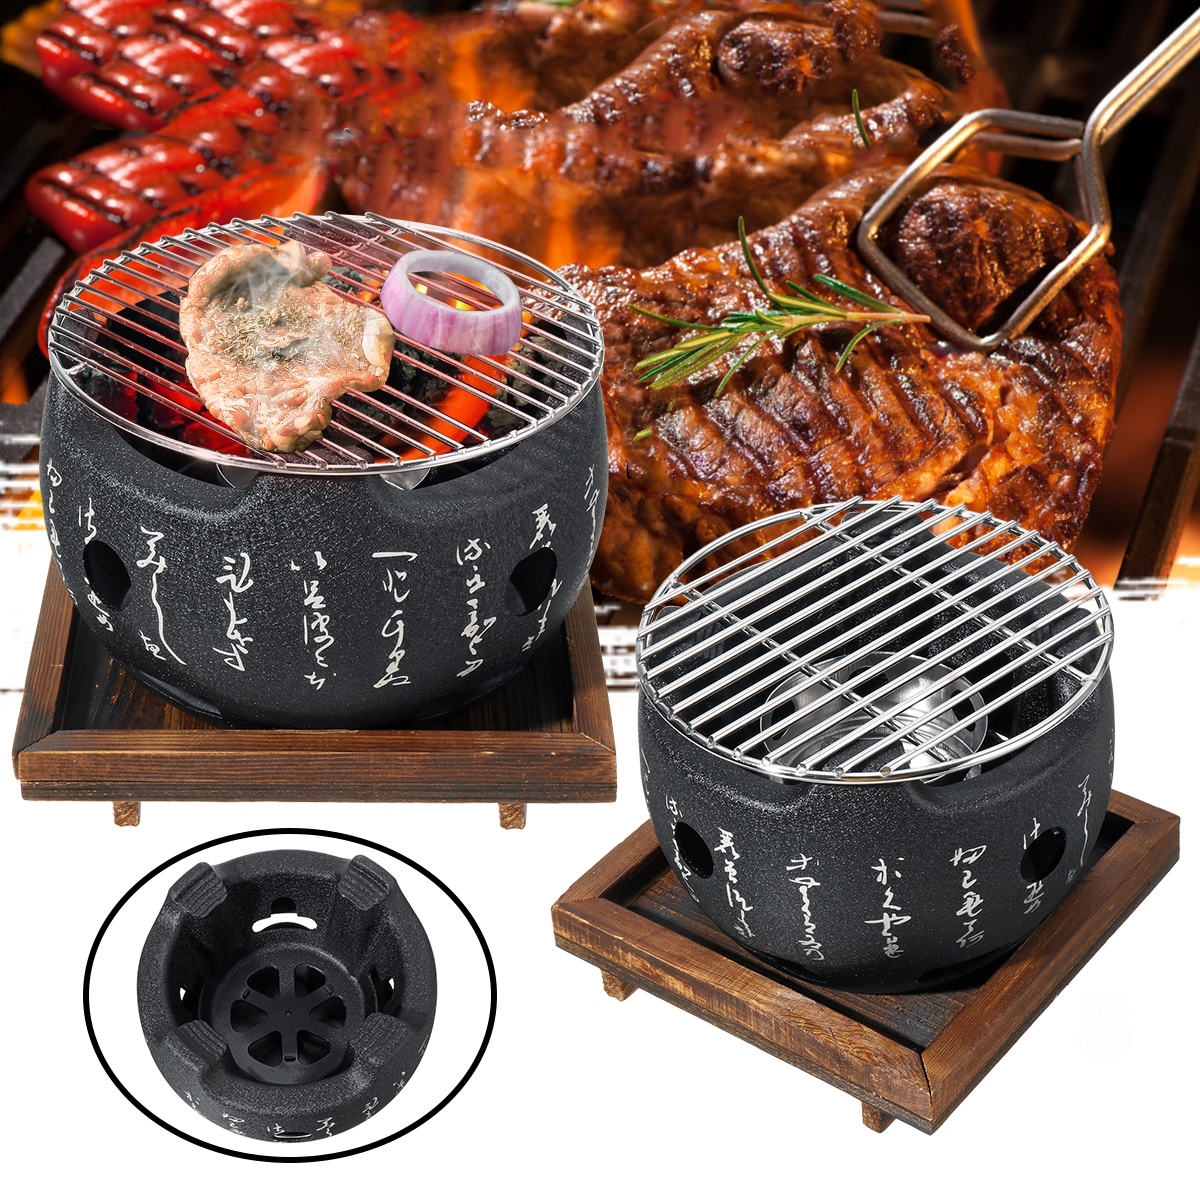 Korean Japanese Style BBQ Grill Charcoal Grill Aluminium Alloy Portable Barbecue Tools - image 1 of 15